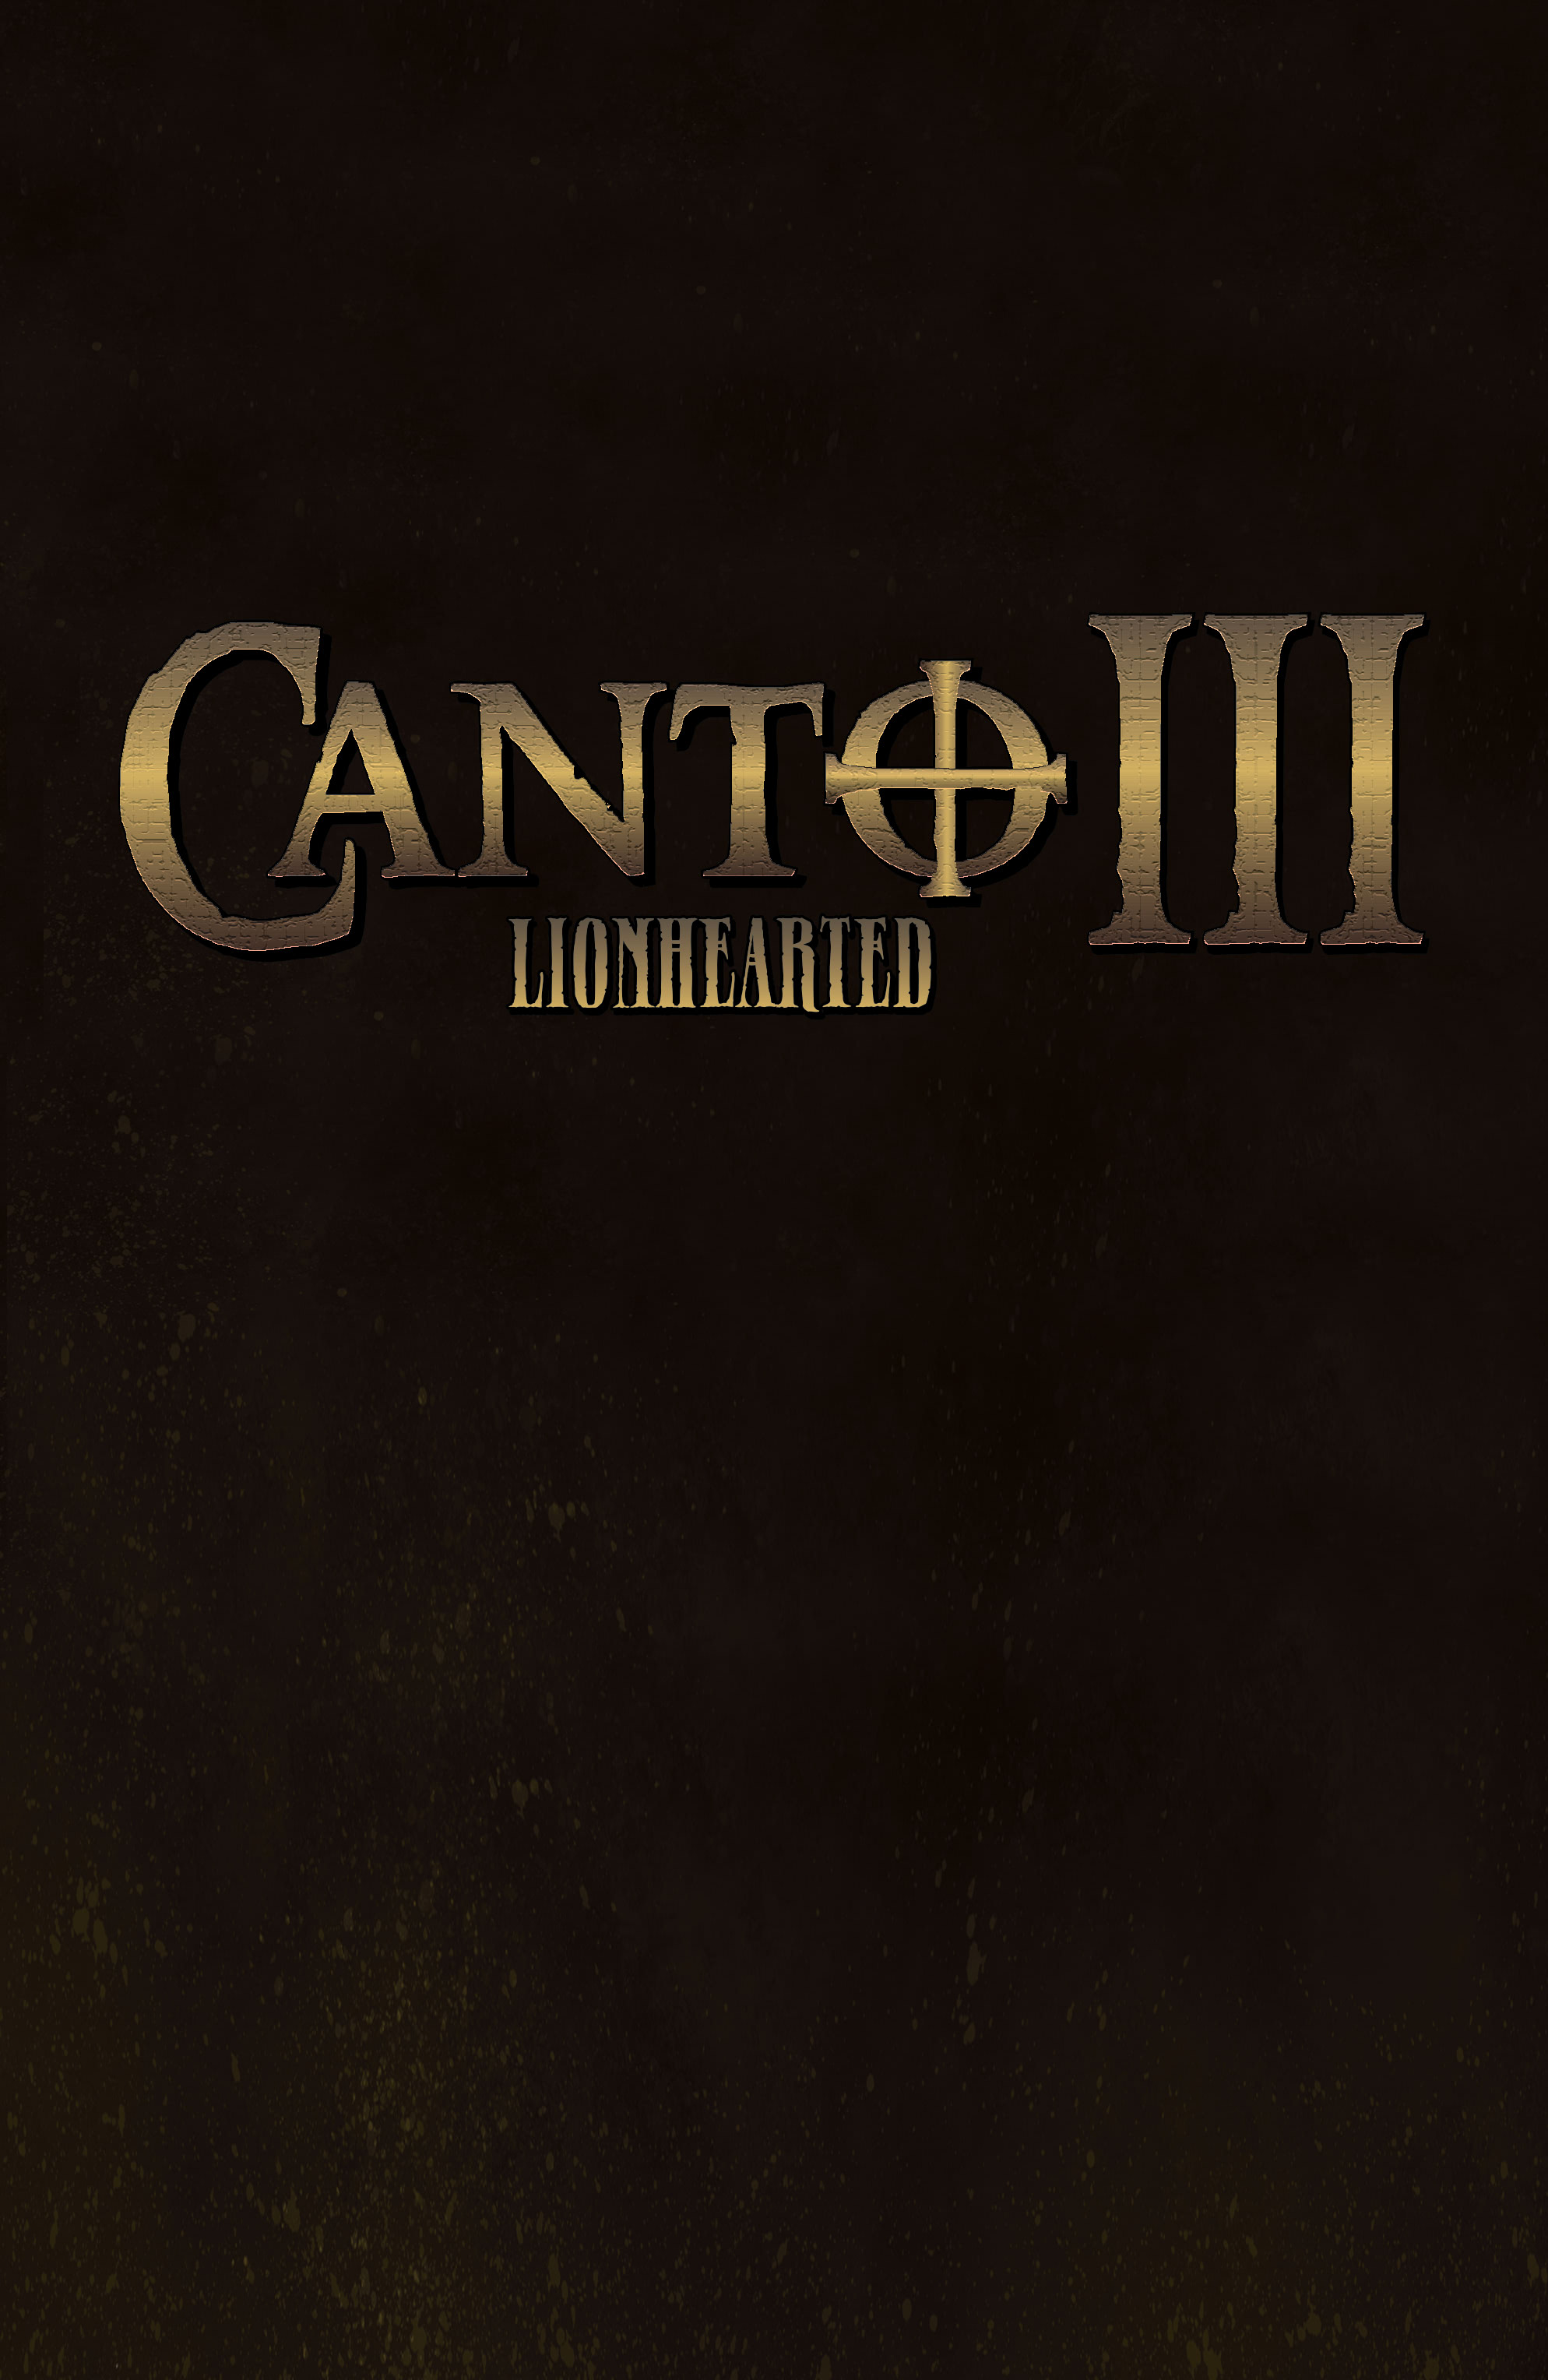 Read online Canto III: Lionhearted comic -  Issue #4 - 28